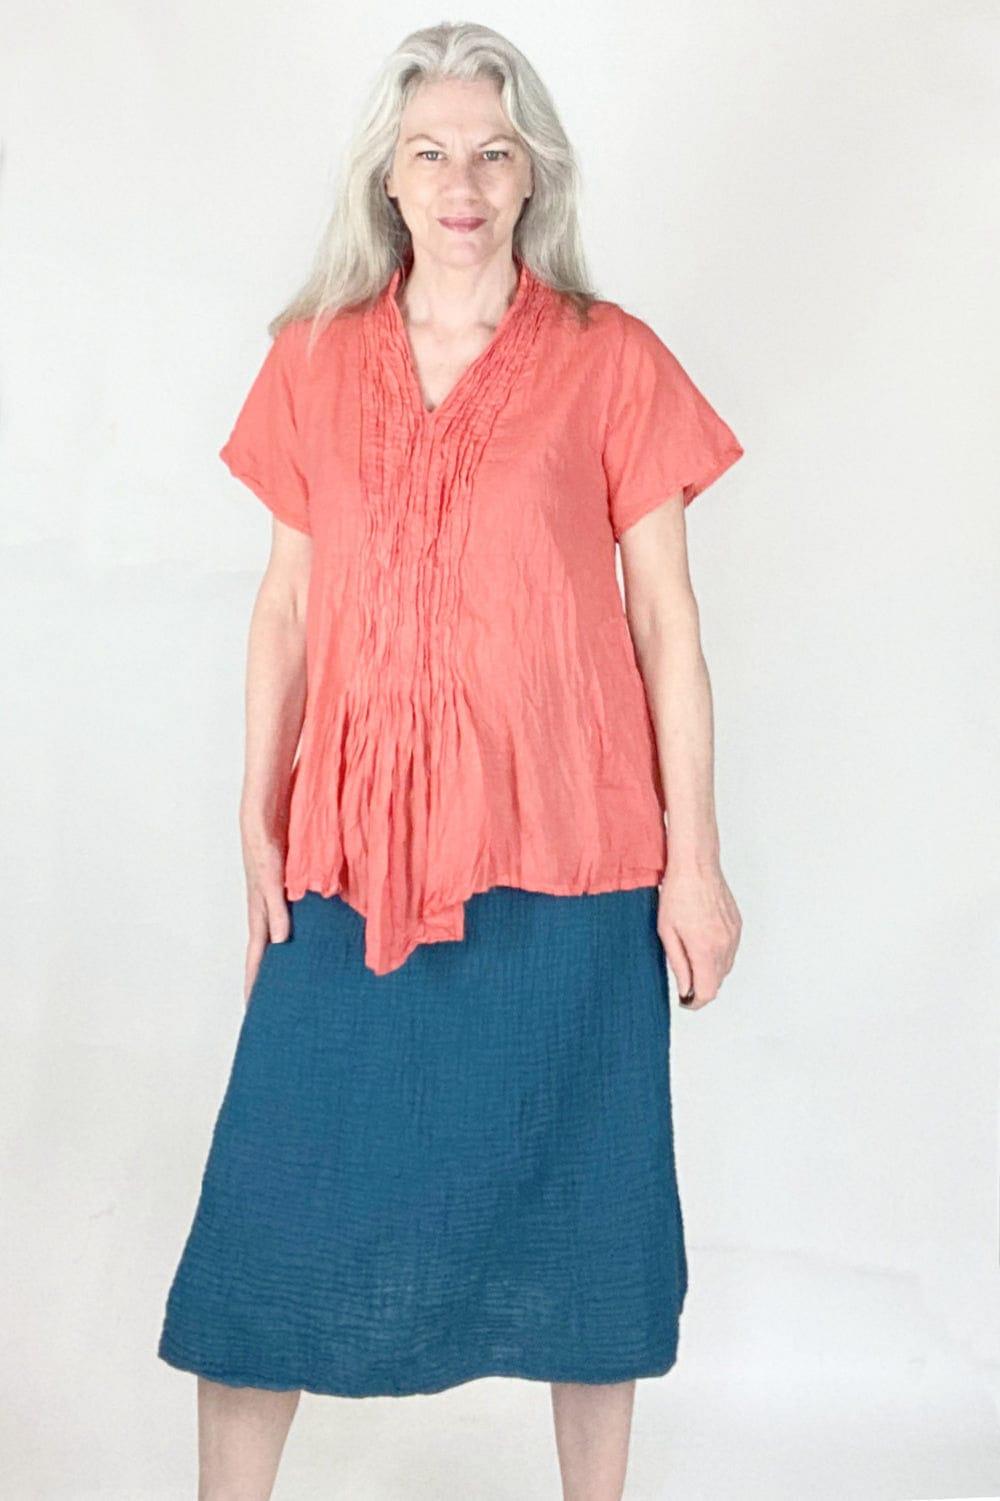 Woman with long grey hair wearing a coral coloured cotton top with short sleeves and front detail with a simple aline cut cotton navy blue skirt